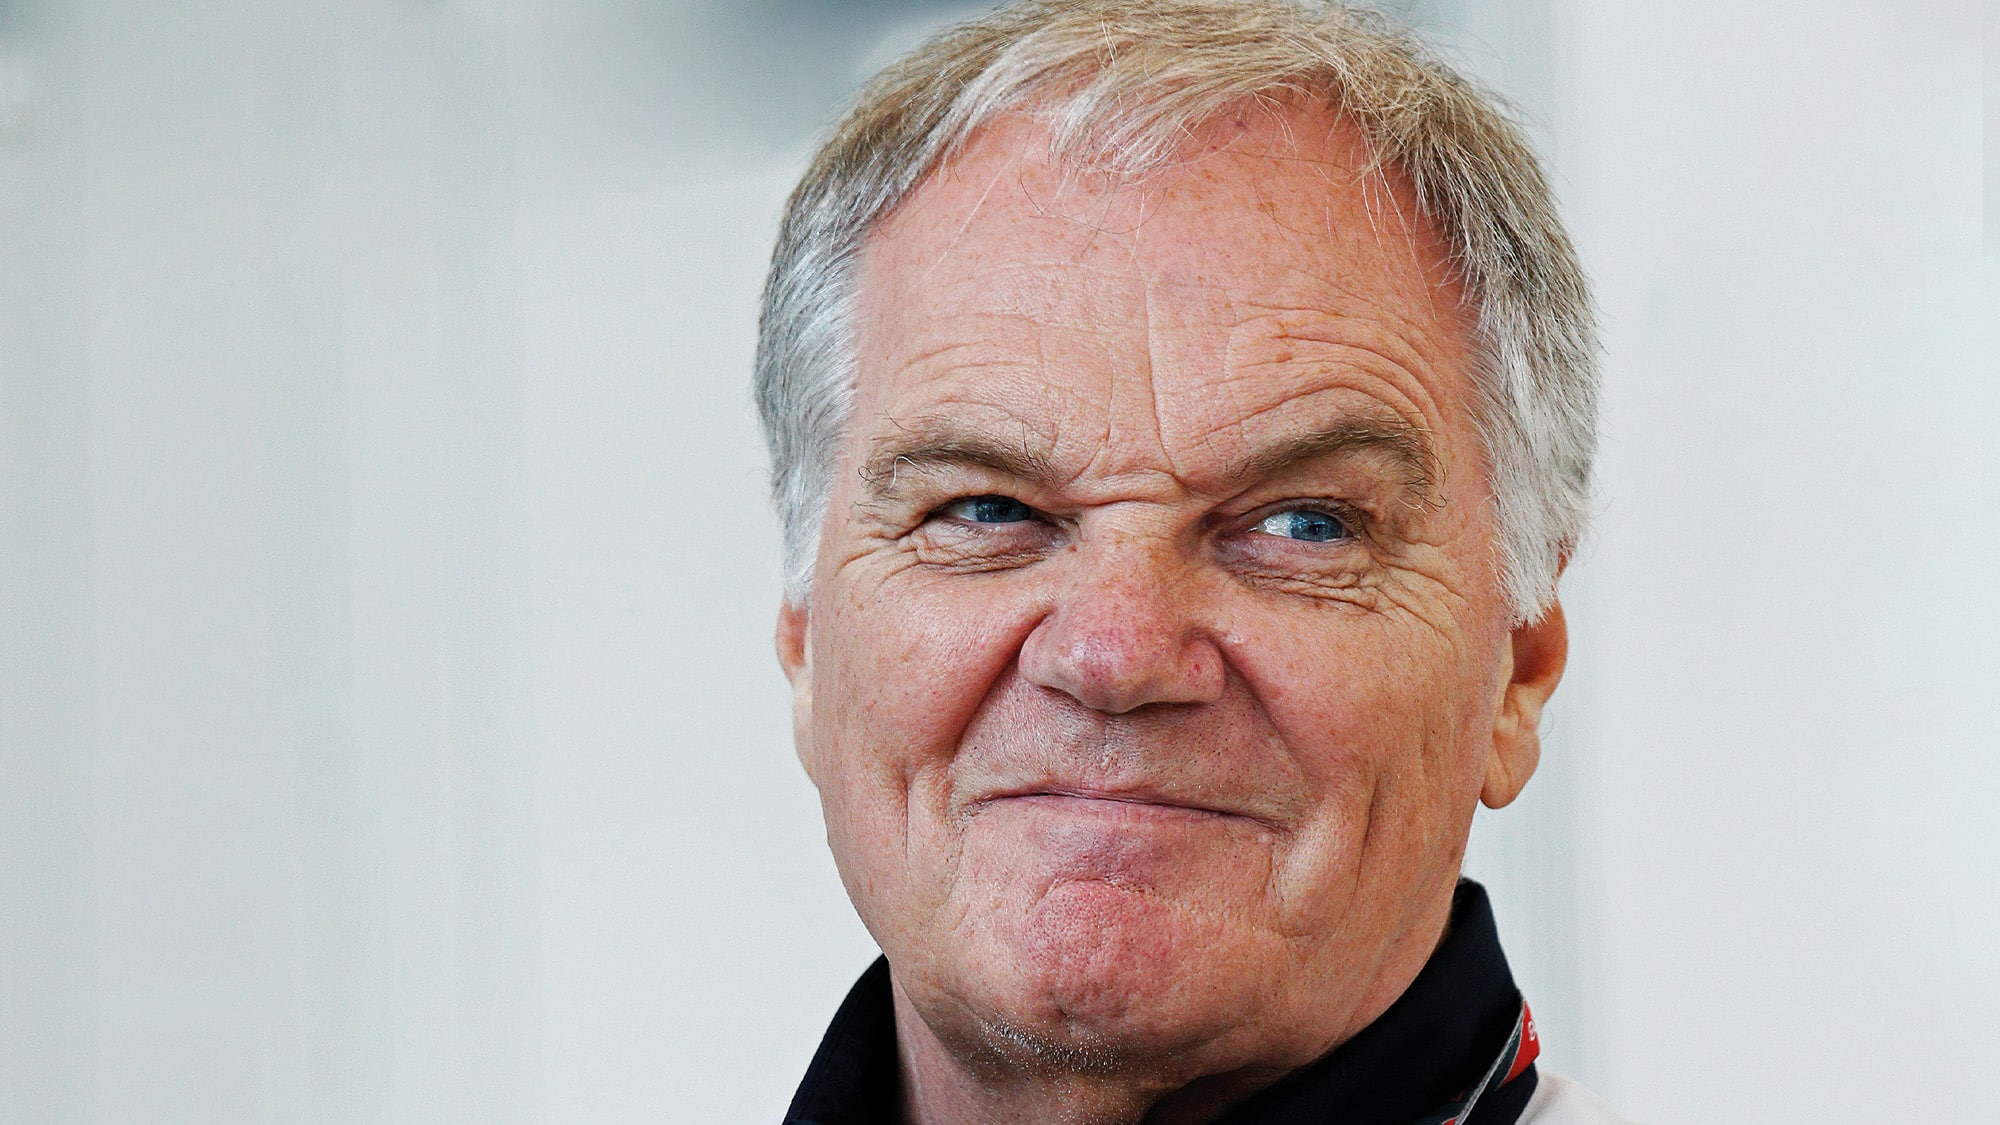 Behind the scenes at F1 - Who is Sir Patrick Head?